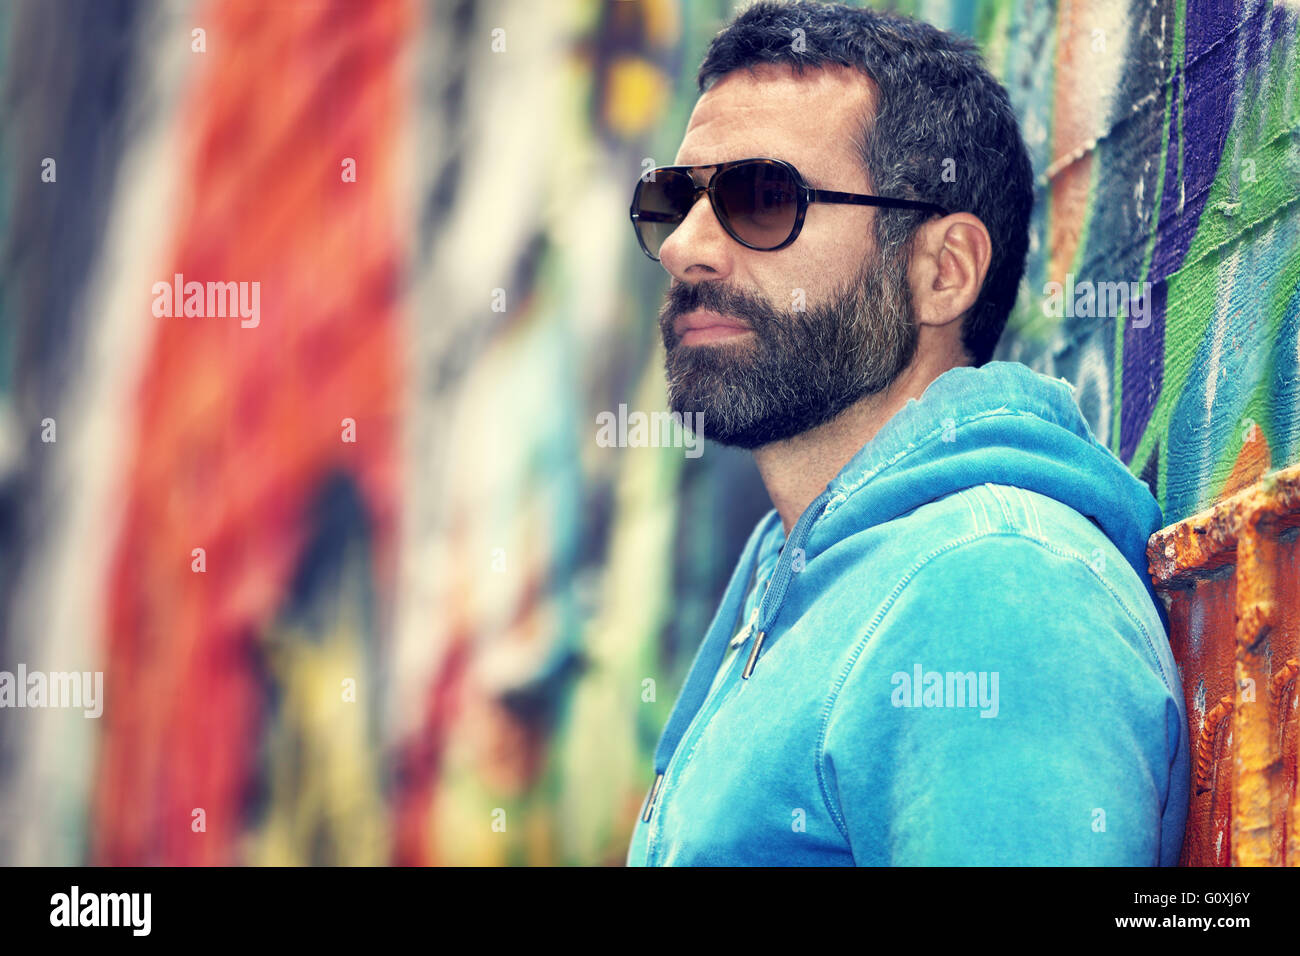 Portrait of a handsome man with stylish beard and sunglasses, standing over colorful city wall background, fashion street look Stock Photo